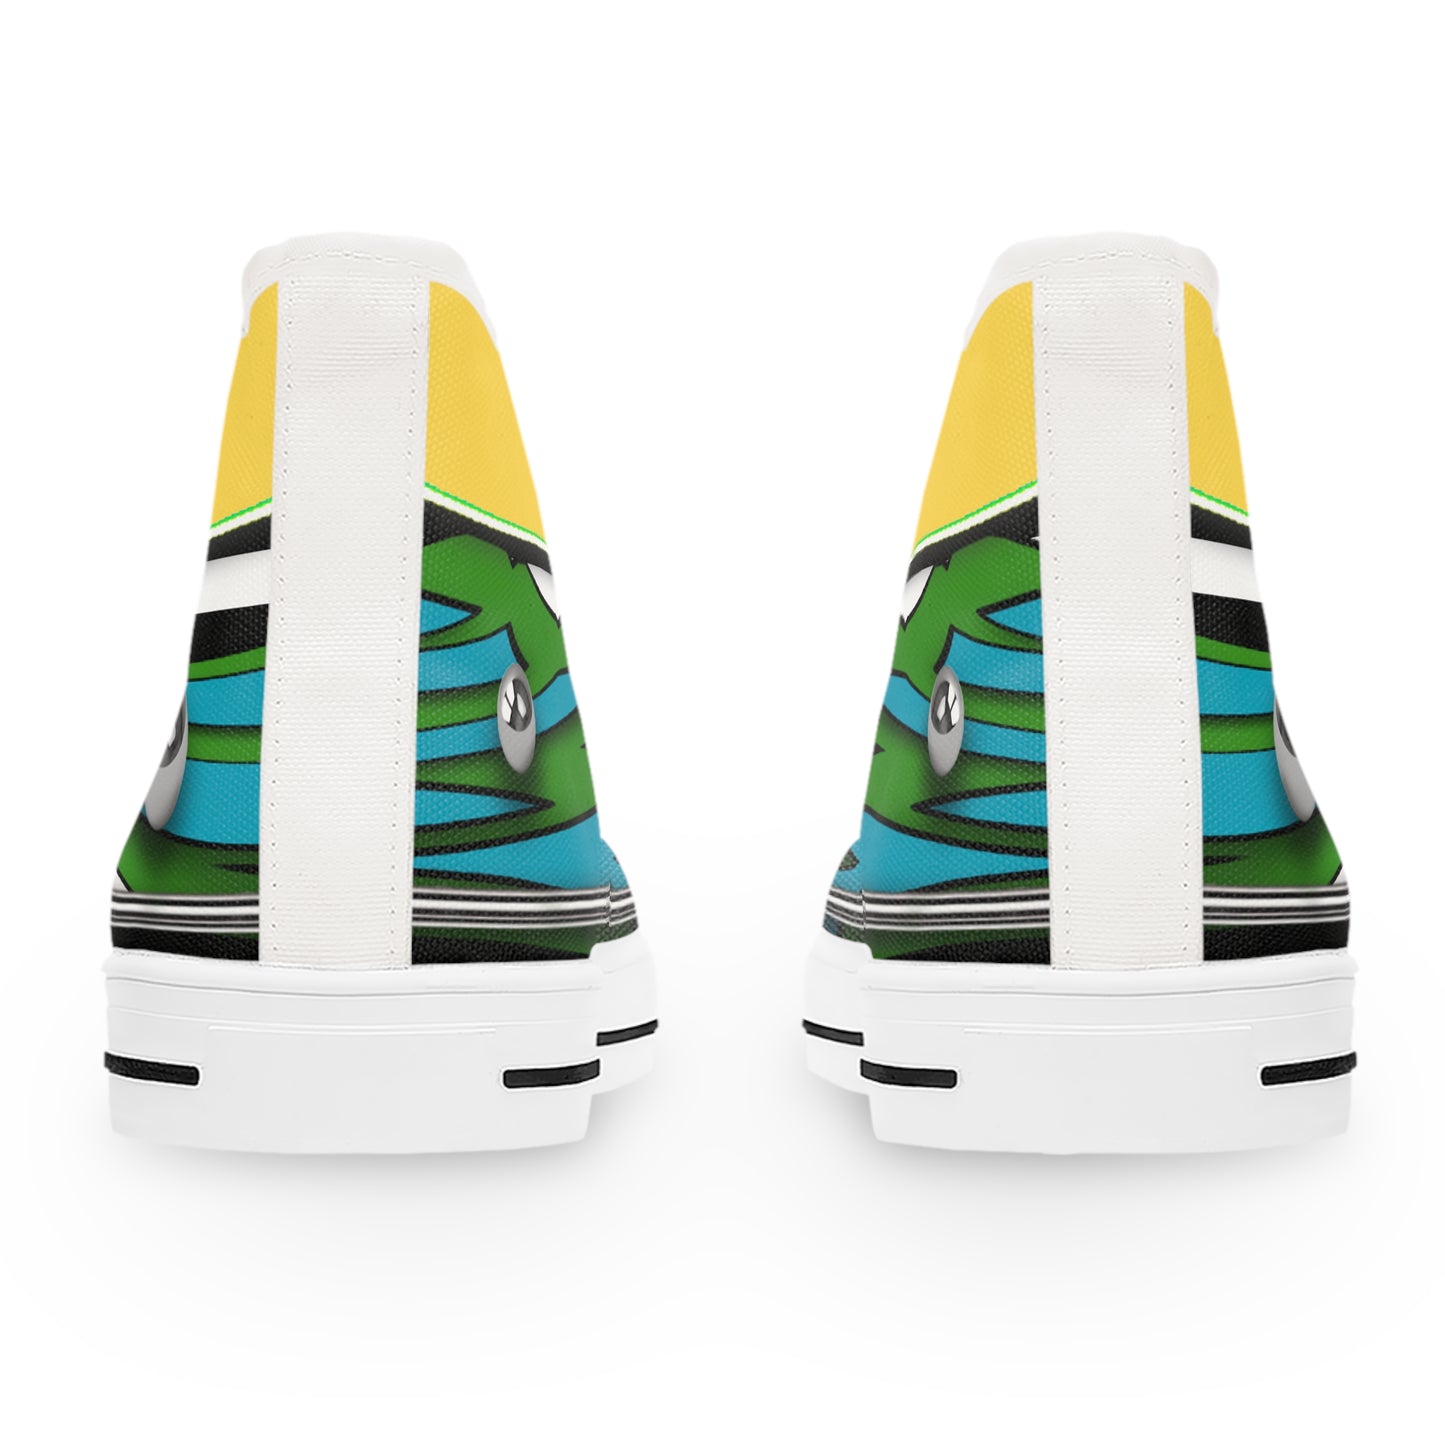 Women's High Top Graphics Sneakers - 10004 US 12 White sole